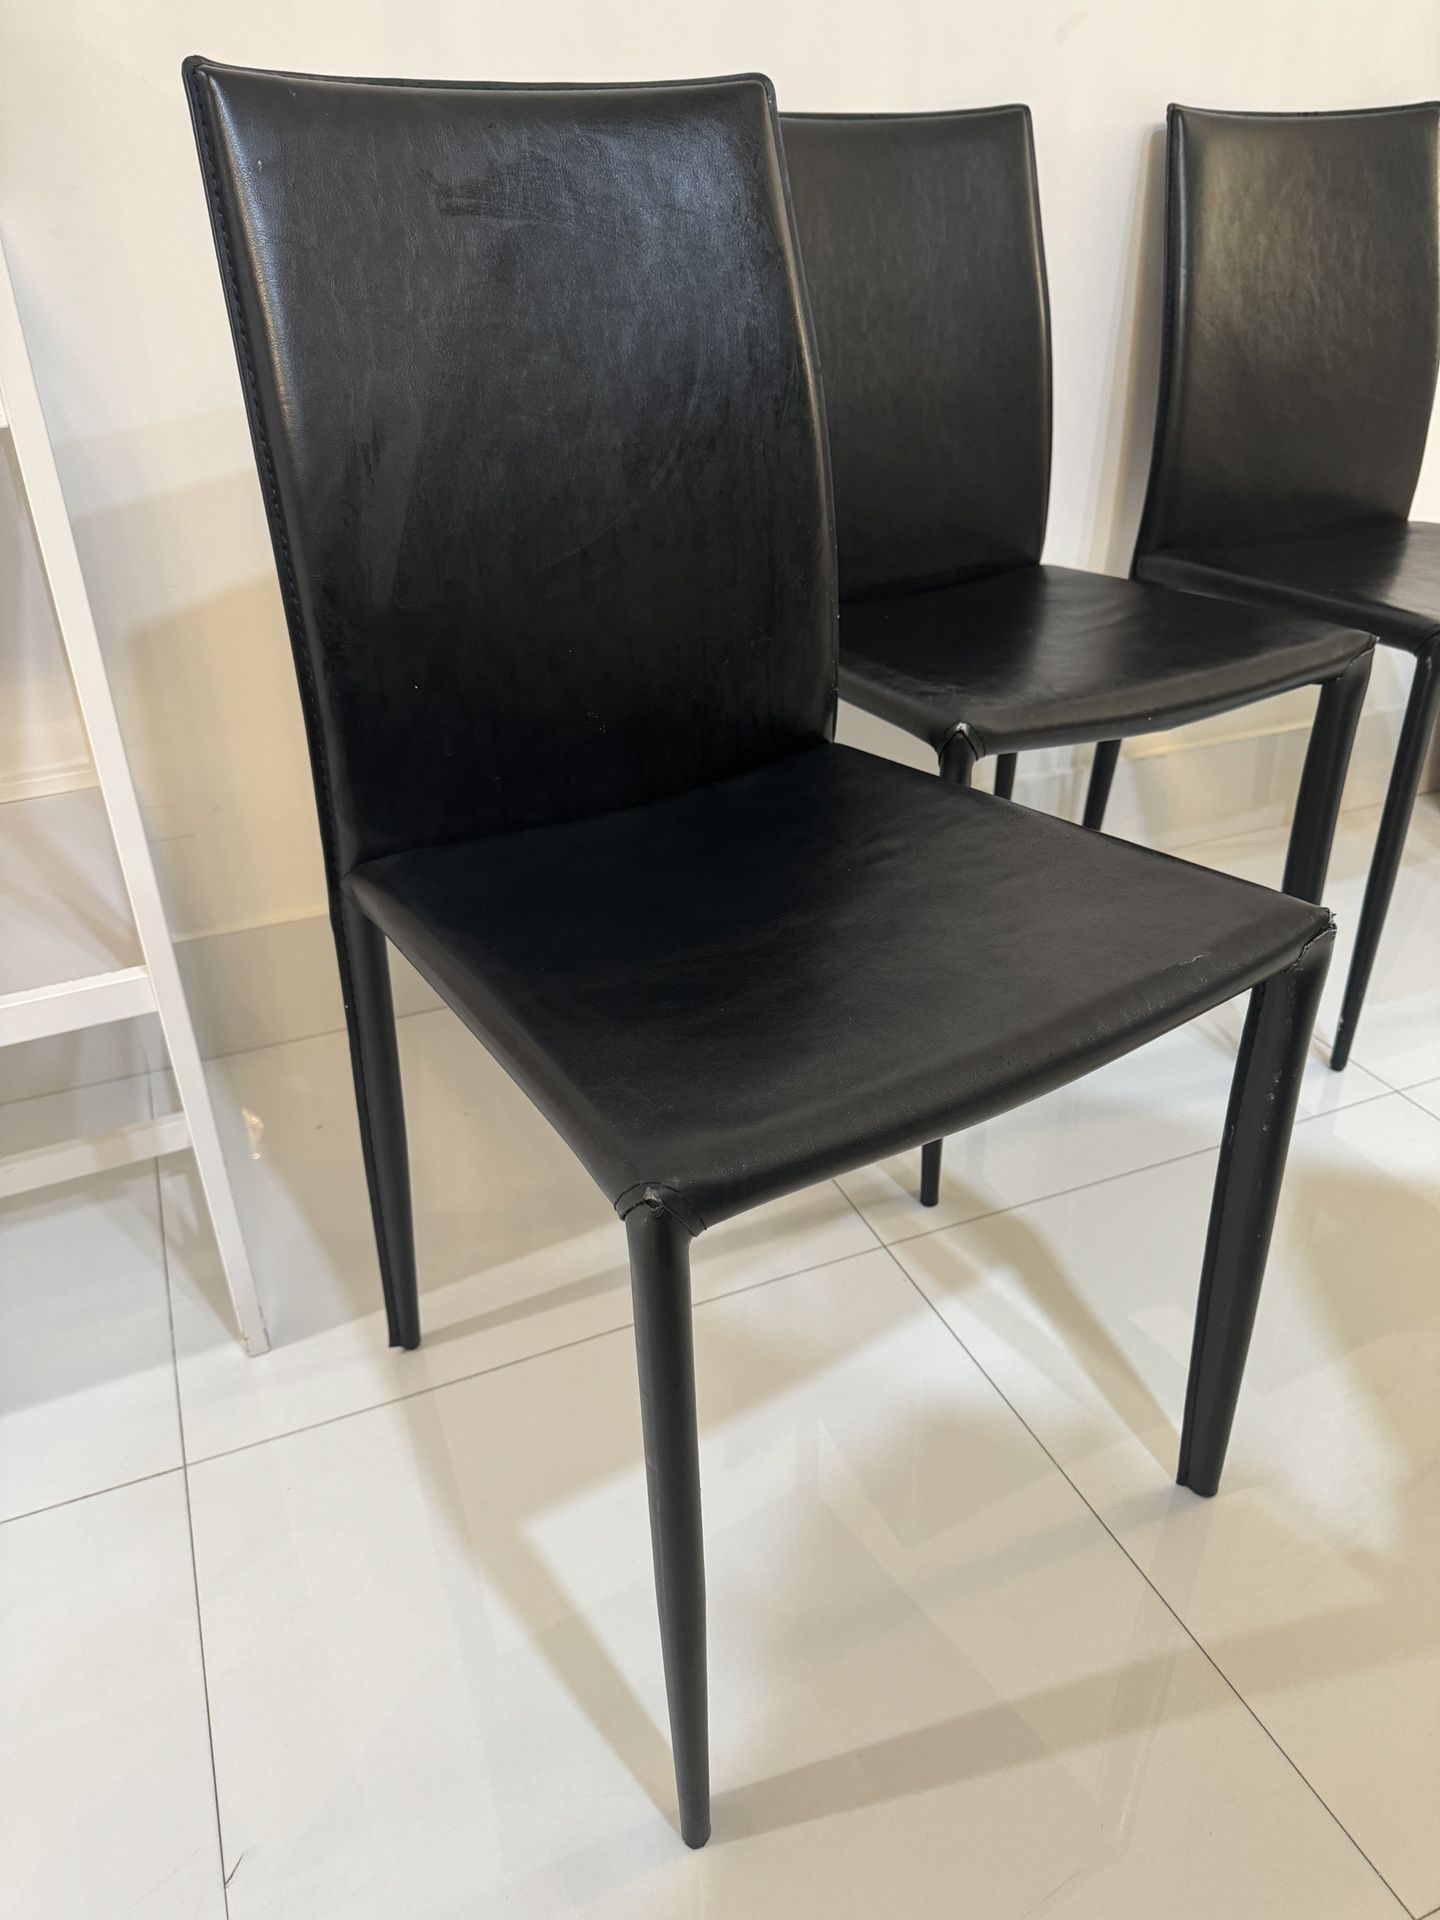 4 Leather Black Chairs